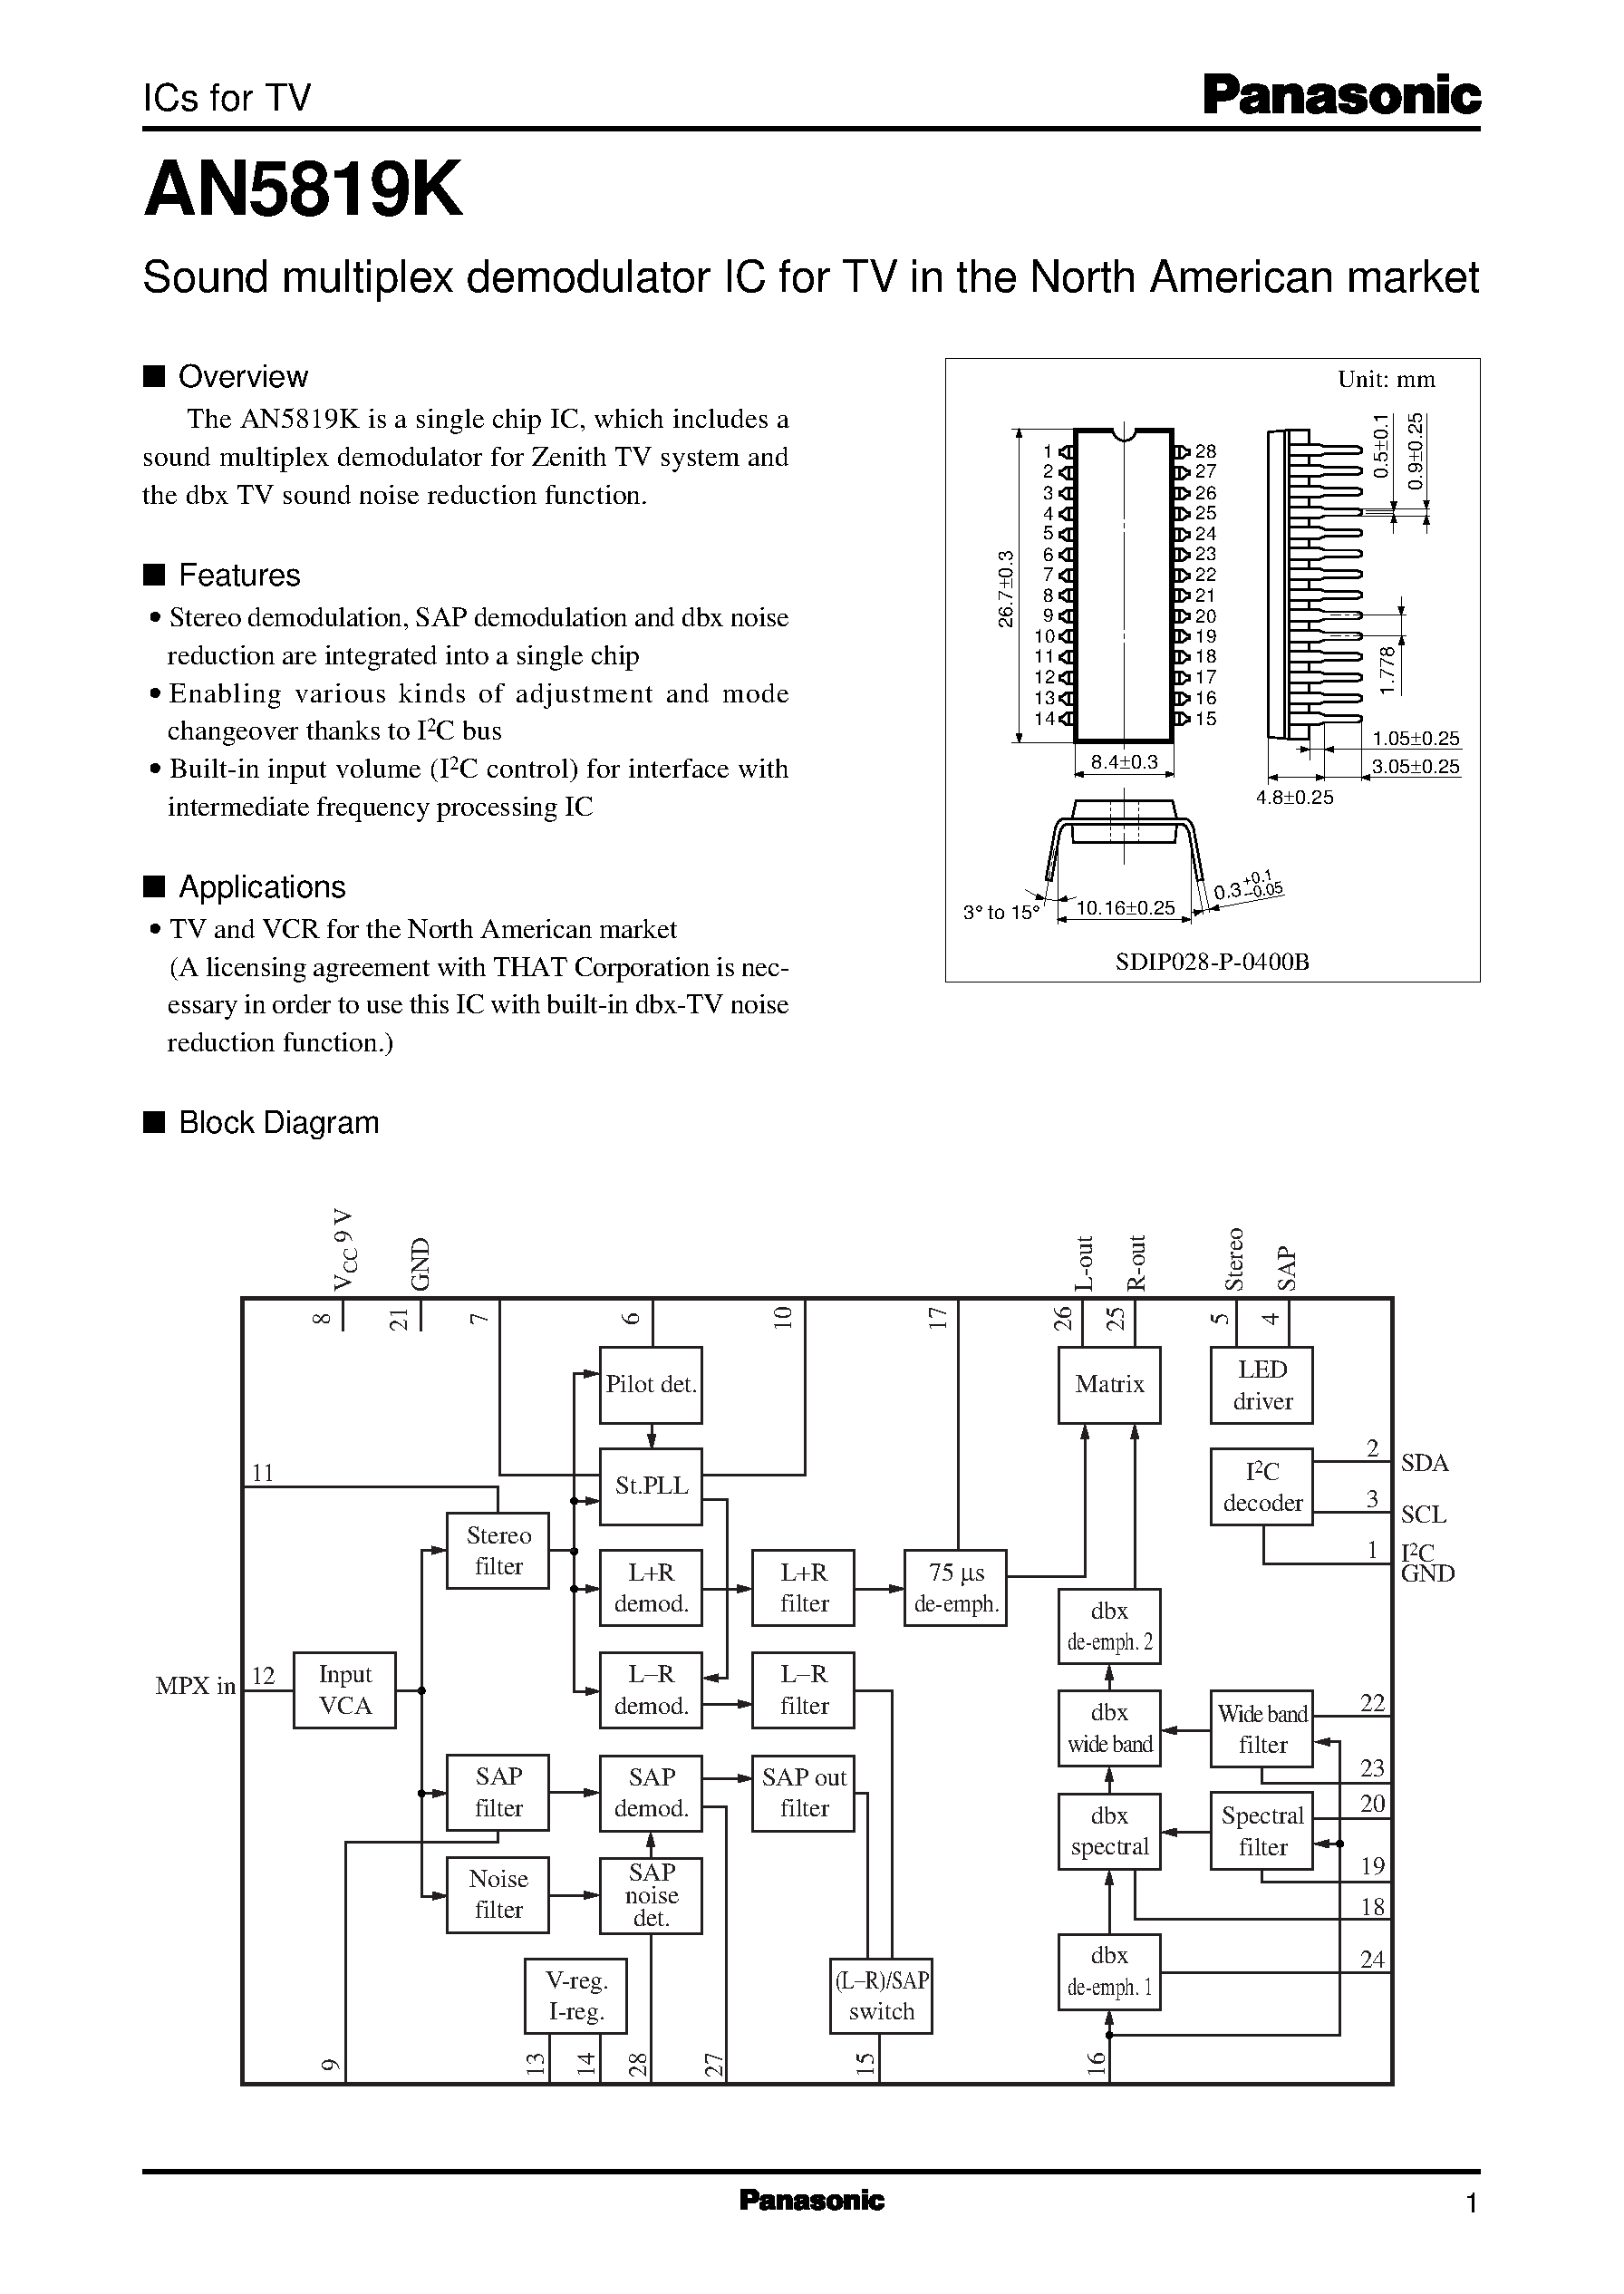 Datasheet AN5829 - Sound multiplex decoder IC for the U.S. televisions page 1